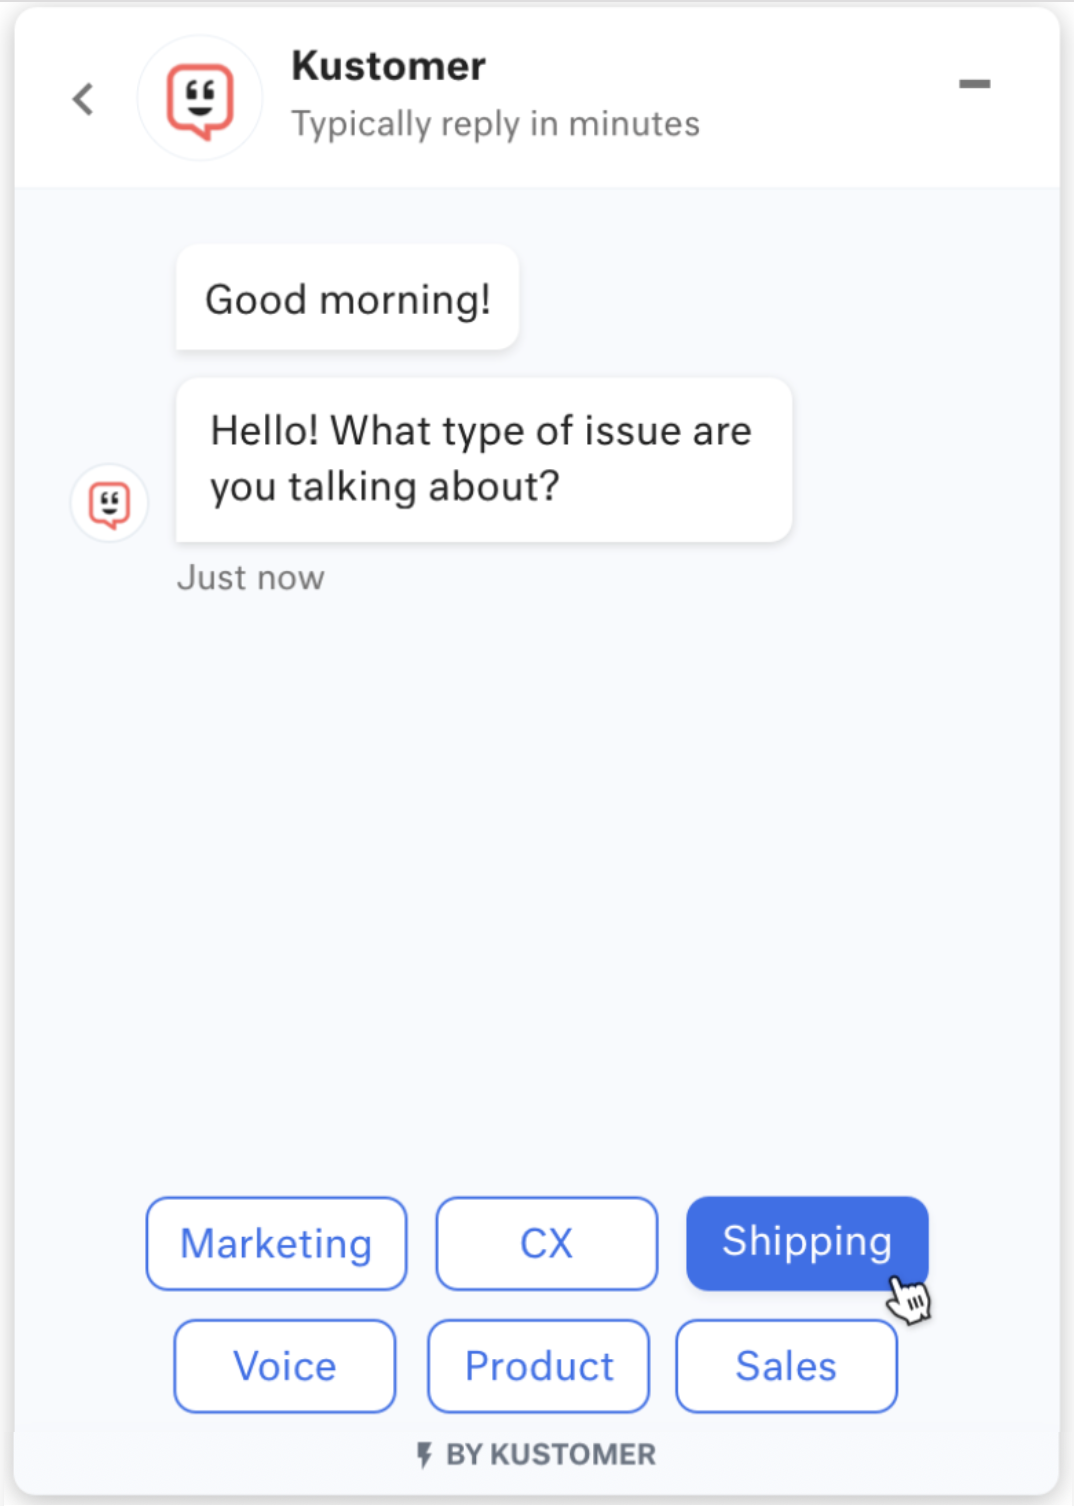 Message template type `quick_replies` (Quick replies) in the chat UI.